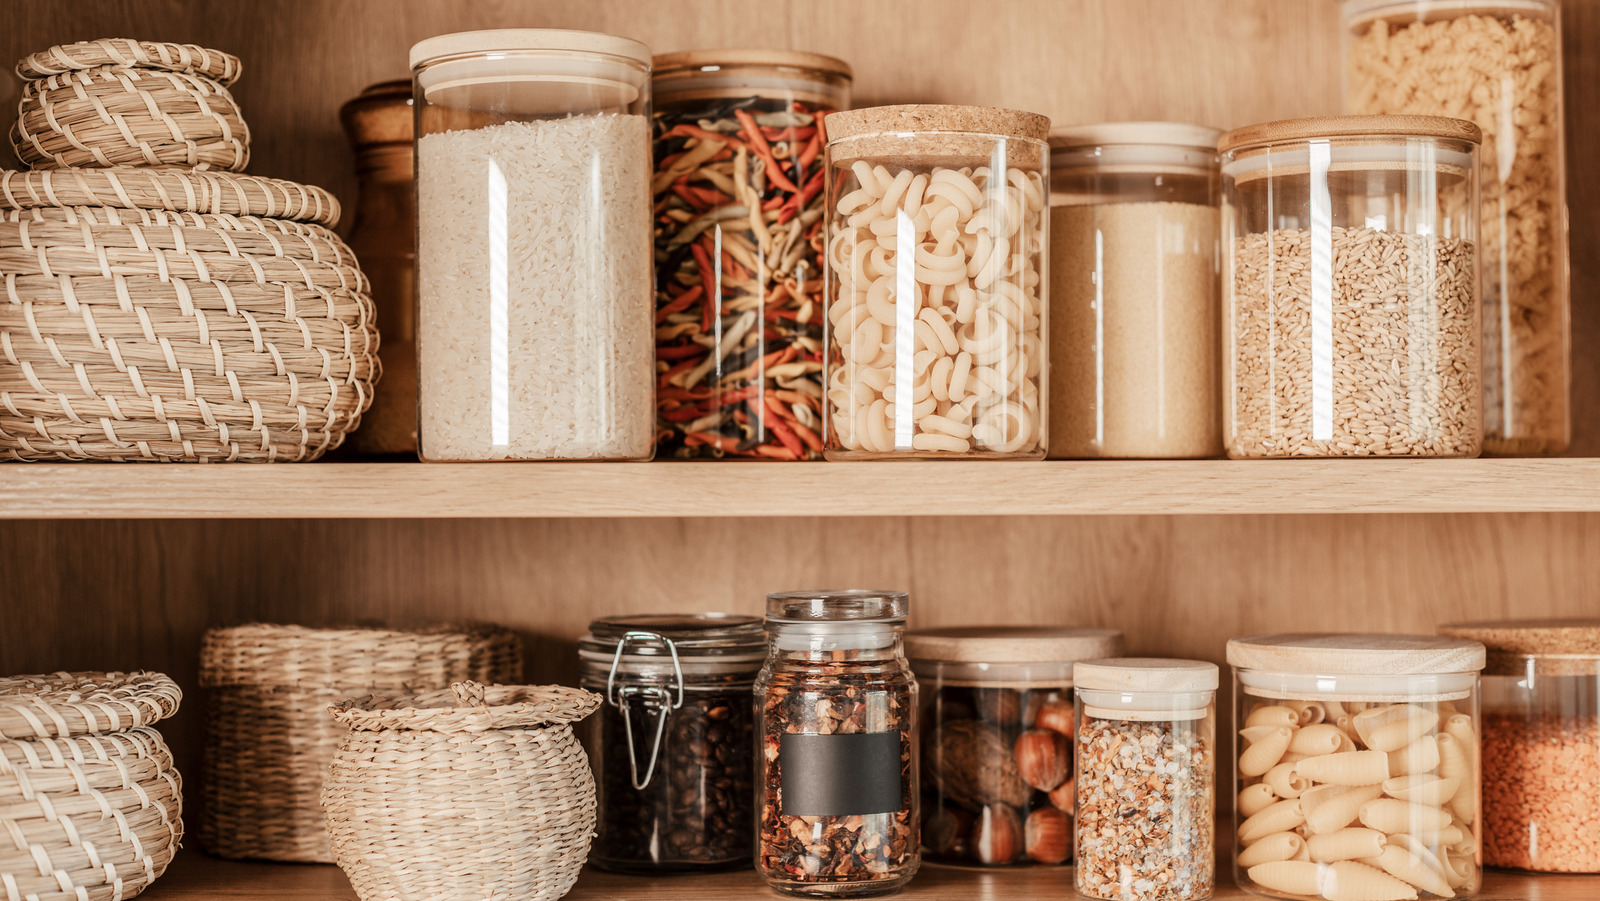 https://www.tastingtable.com/img/gallery/33-pantry-storage-hacks-that-will-leave-you-with-maximum-space/l-intro-1686161046.jpg